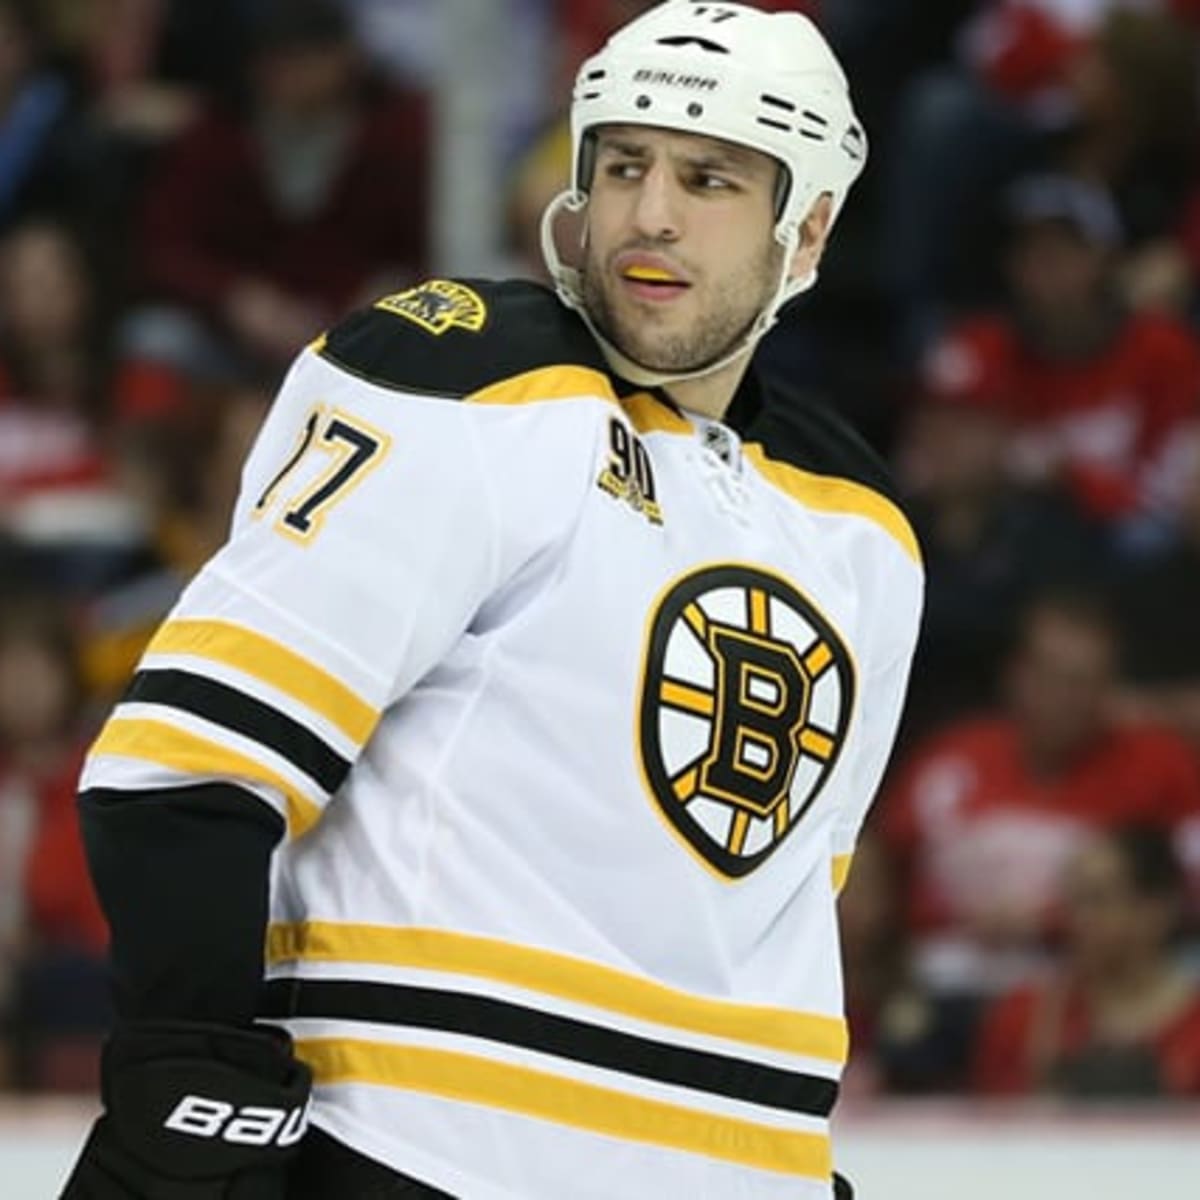 Video: Bruins' Lucic gestures to Habs fans after late penalty